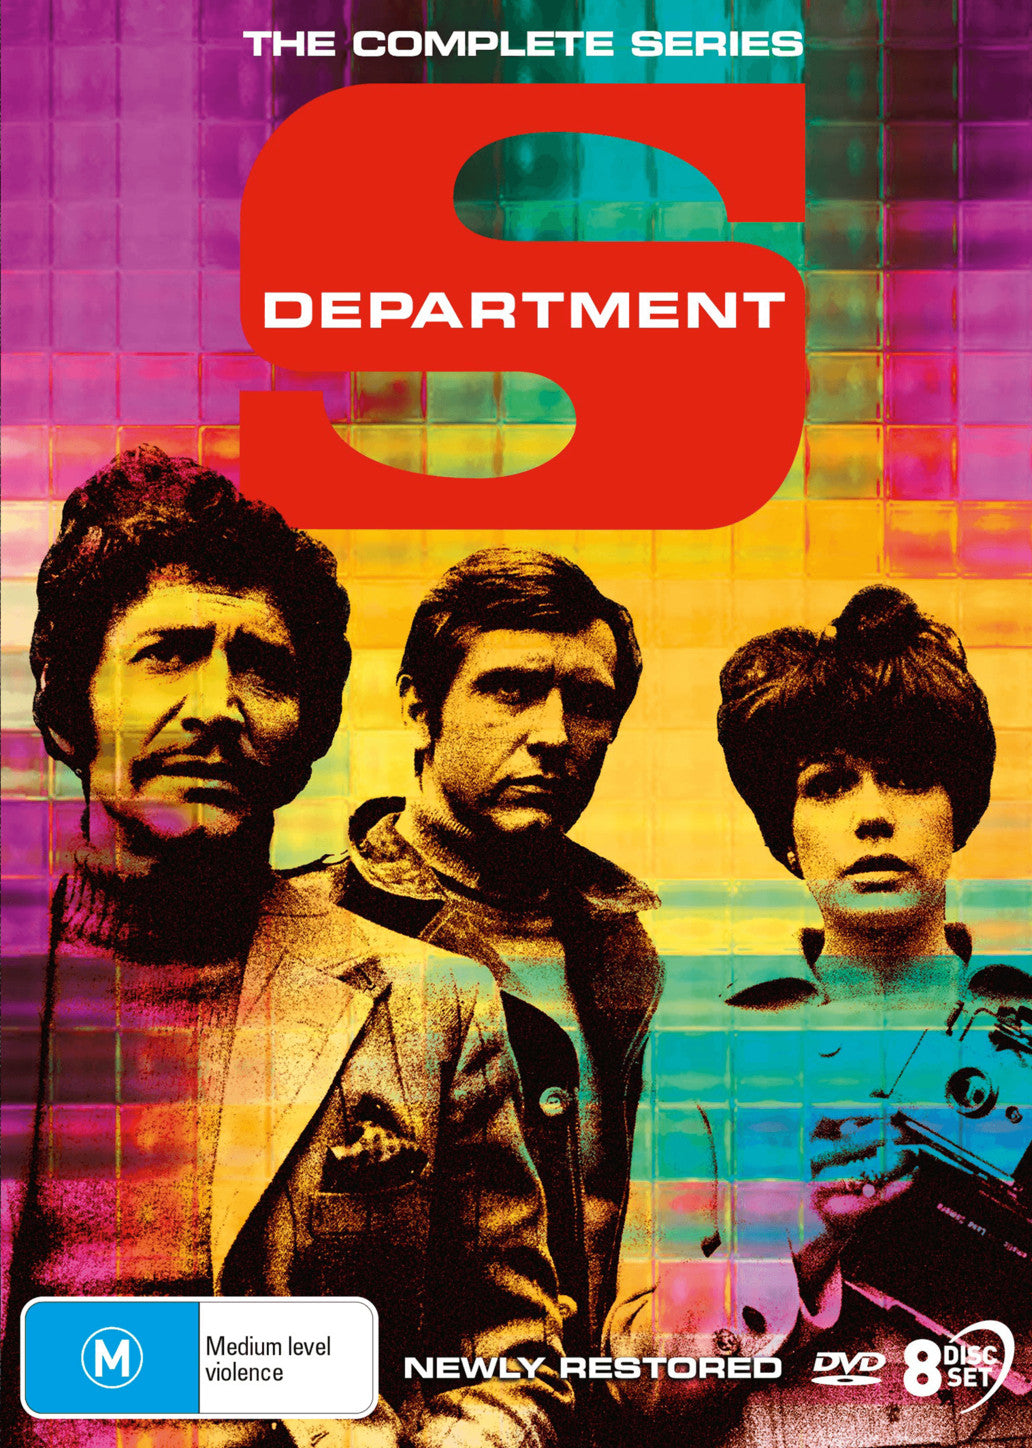 DEPARTMENT S - THE COMPLETE SERIES ULTIMATE EDITION (NEW RESTORATION)